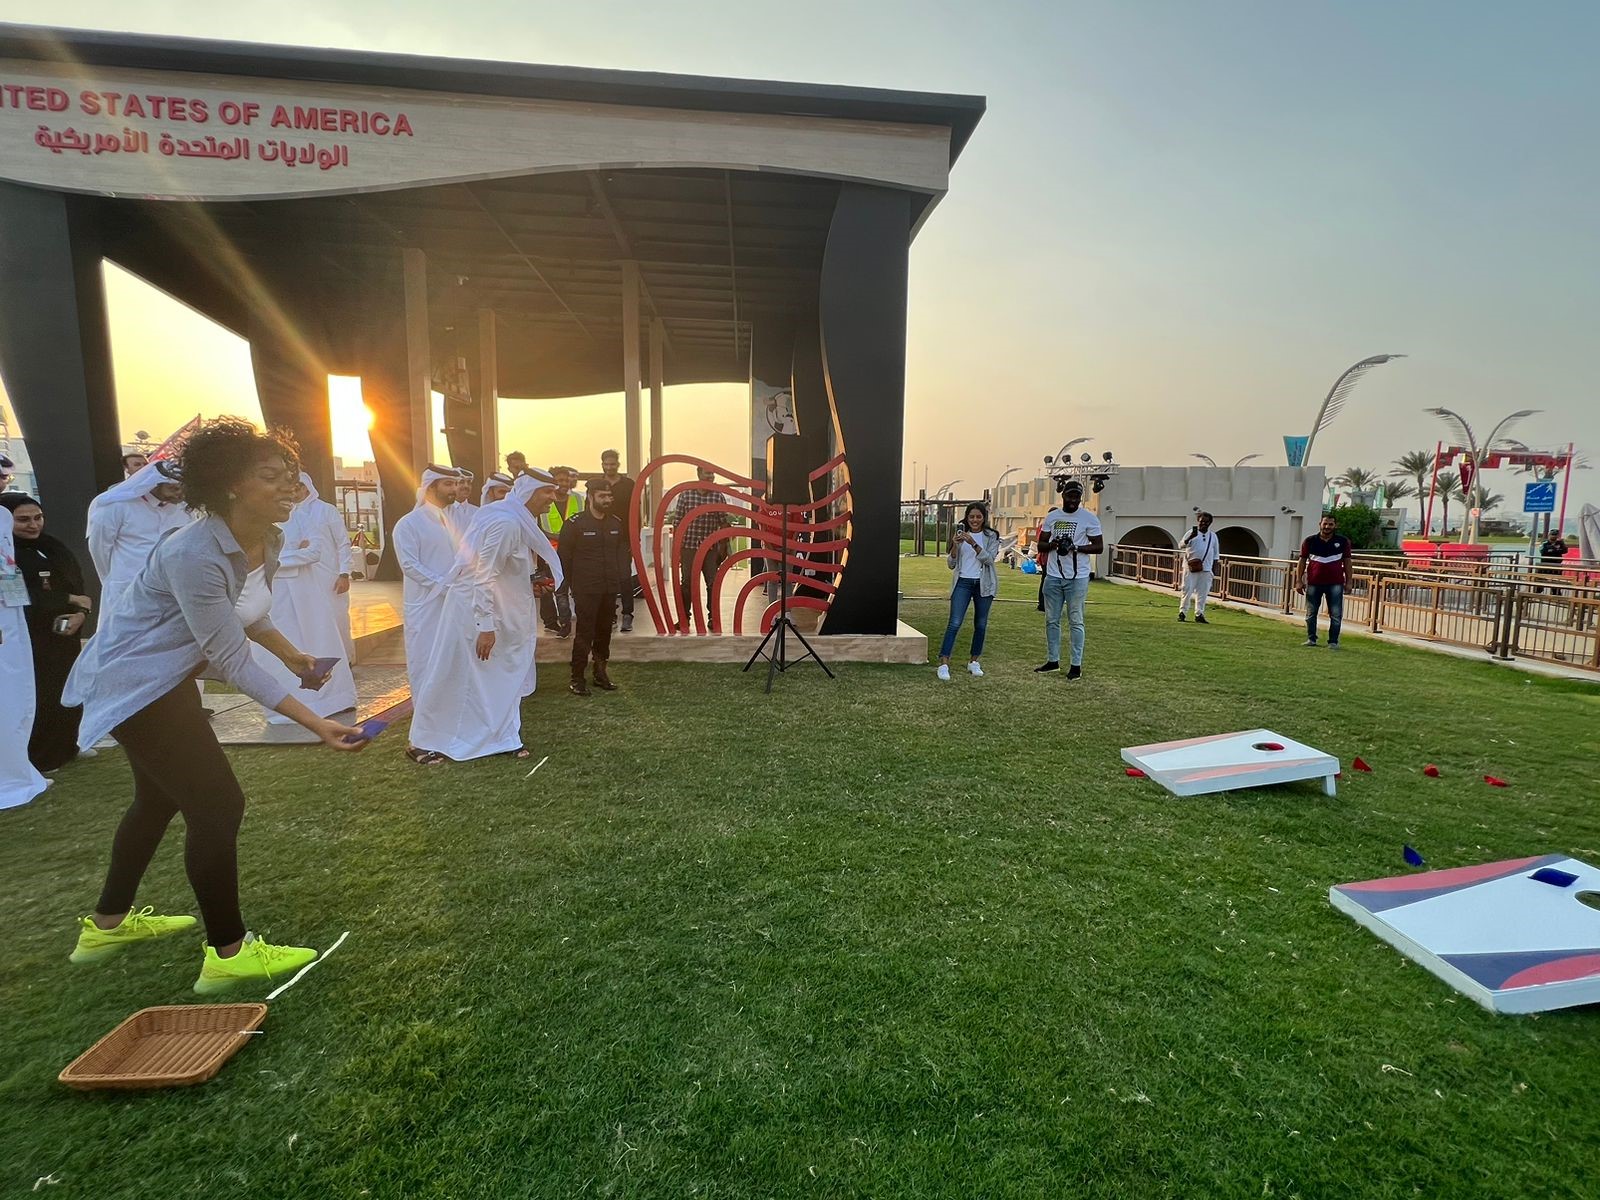 Qatar Prime Minister and Minister of Interior H E Sheikh Khalid bin Khalifa bin Abdulaziz Al joins in opening day festivities at the World Cup USA Pavilion with a fun game of corn hole